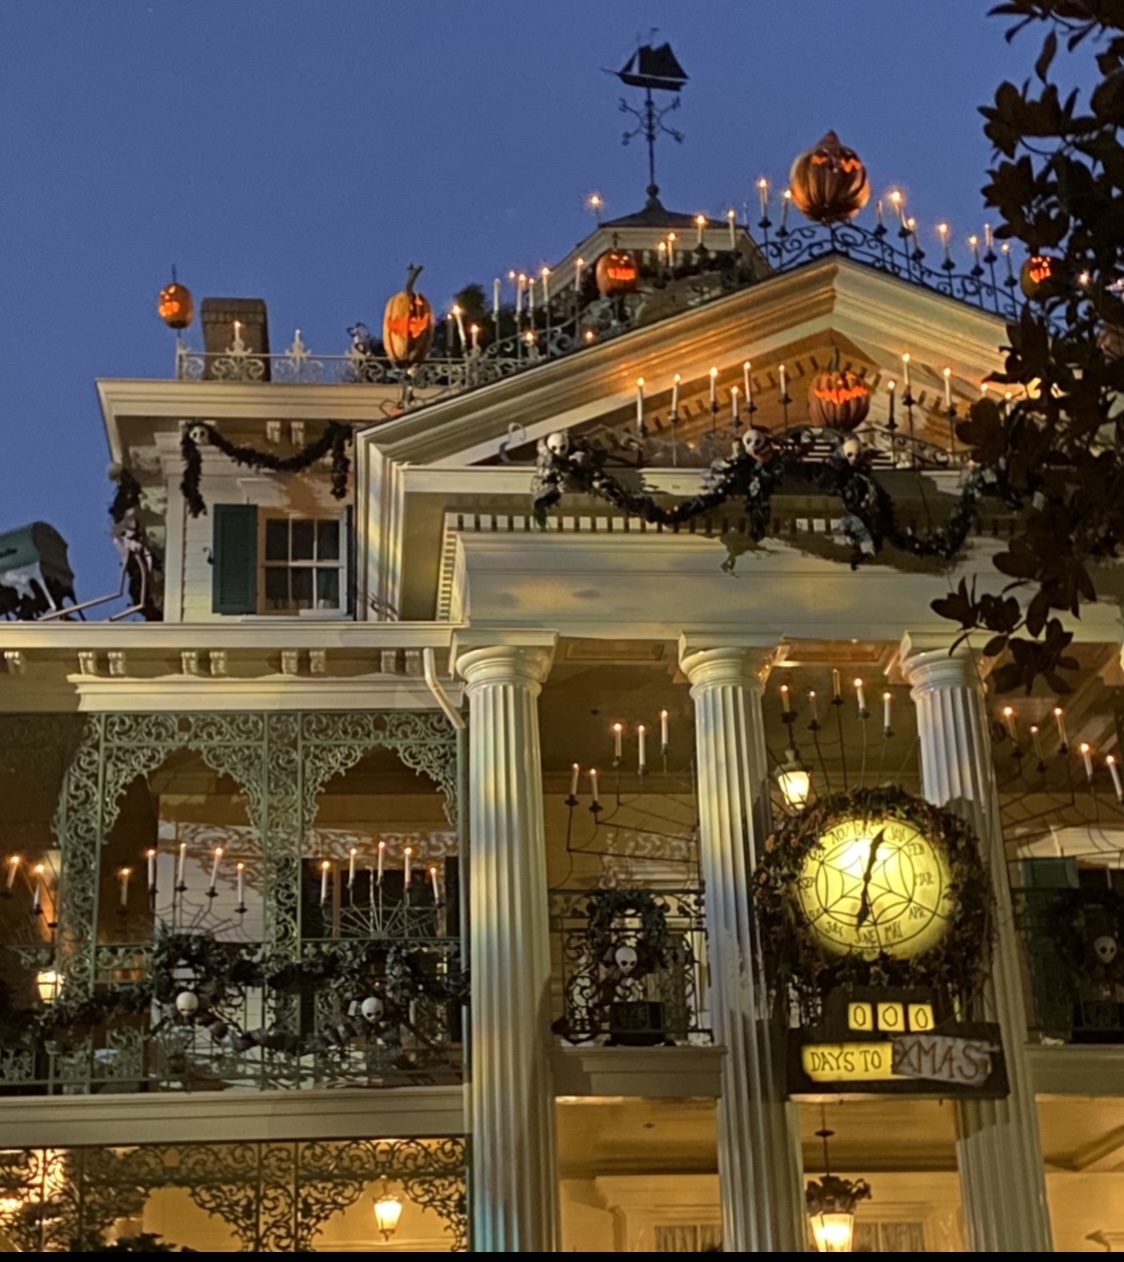 haunted house decorated for halloween